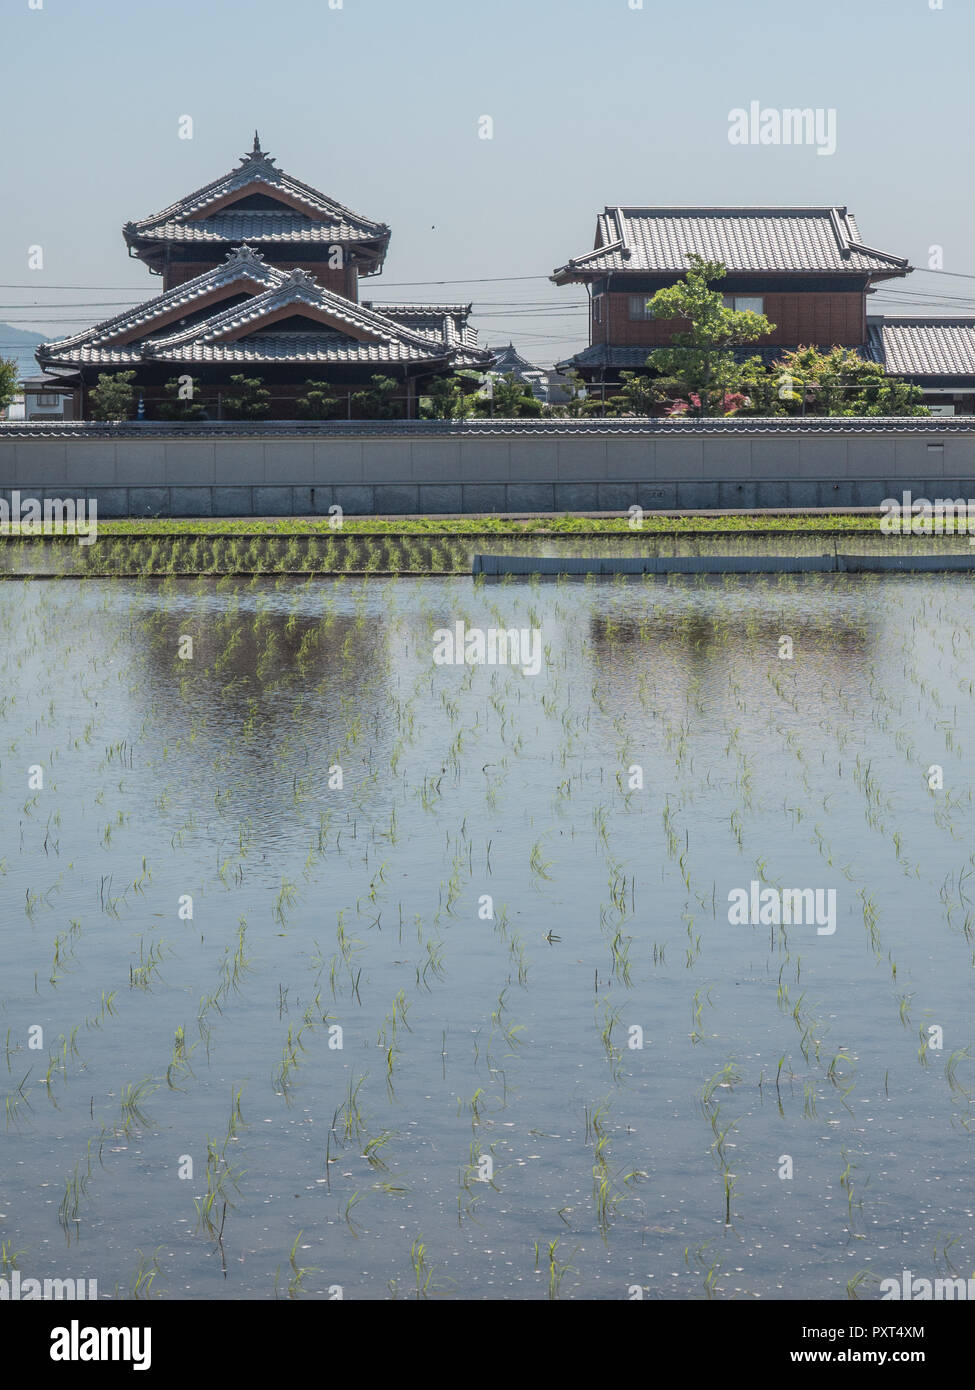 Rice seedlings in fooded field, houses, gleam of grey tile roofs, power cables linking, sunny day, contemporary rural landscape, Sanuki, Kagawa, Japan Stock Photo